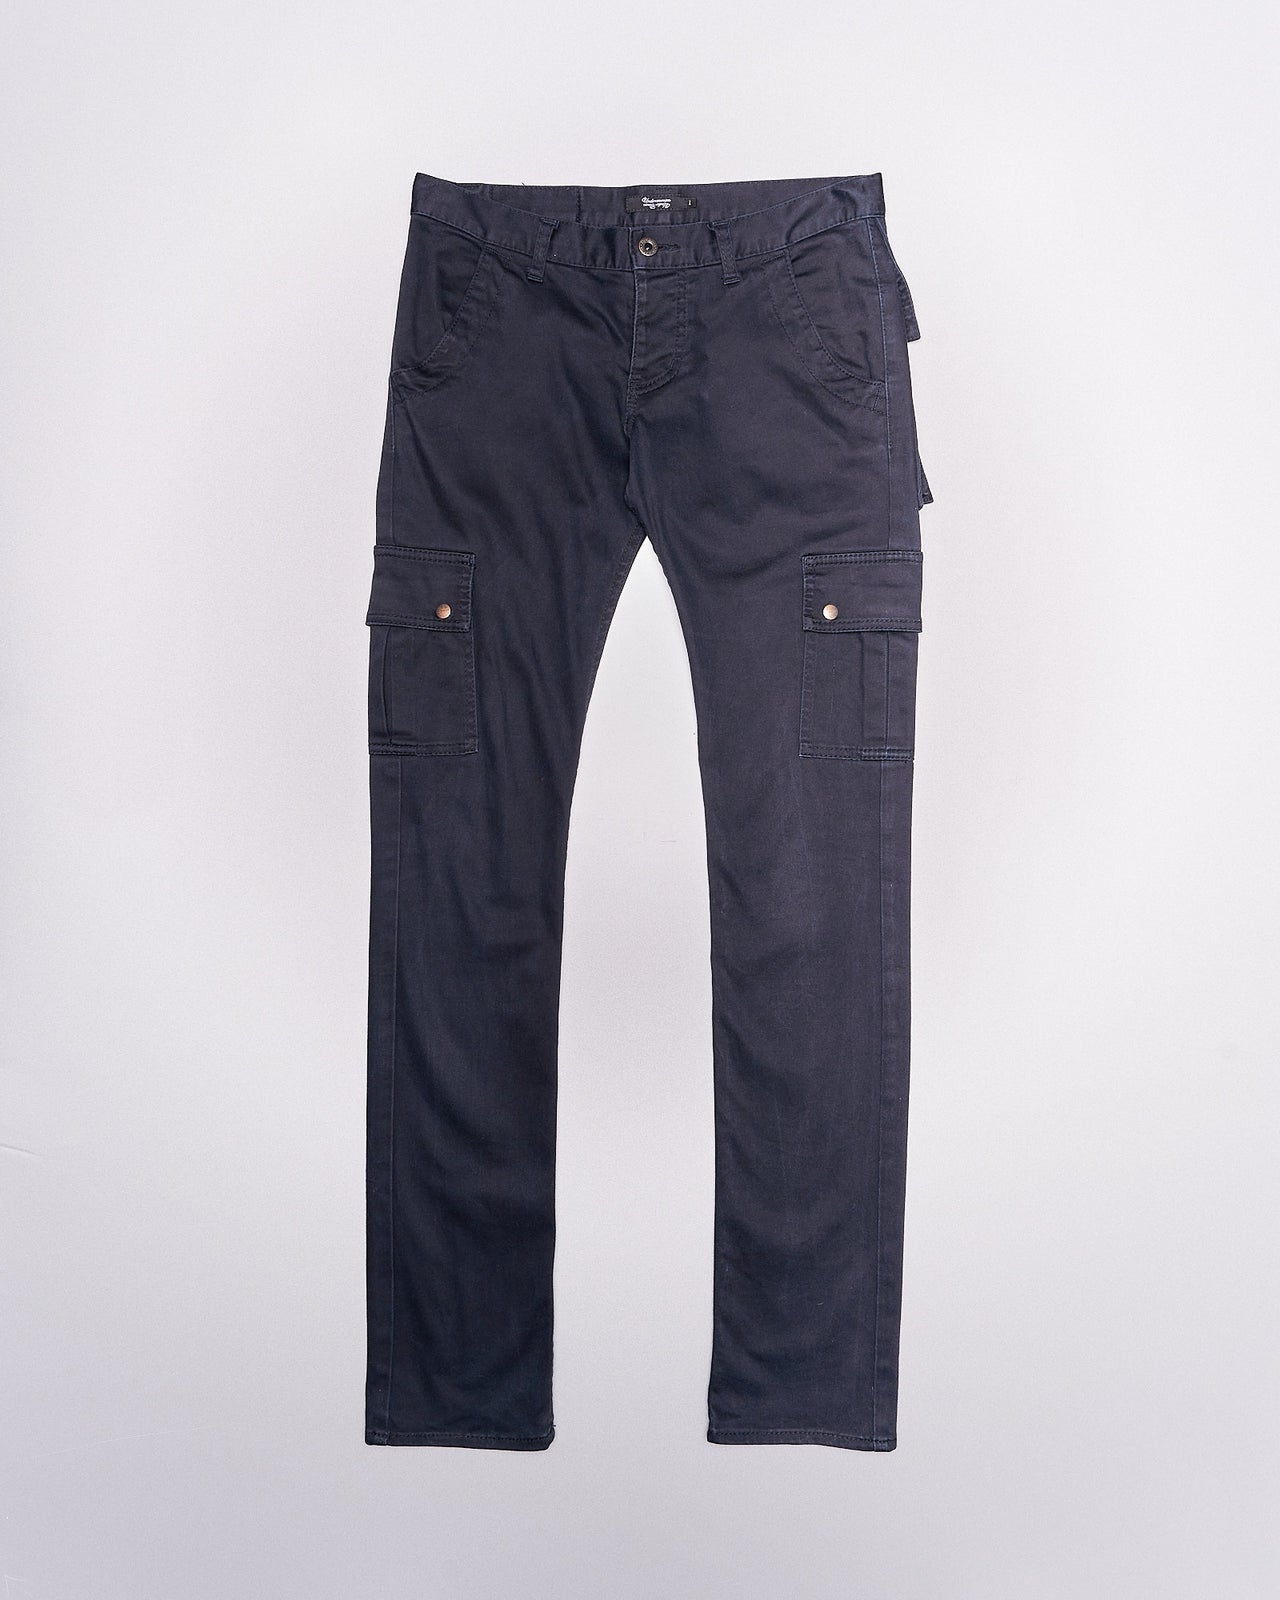 Undercover x Hysteric Glamour cargo pant